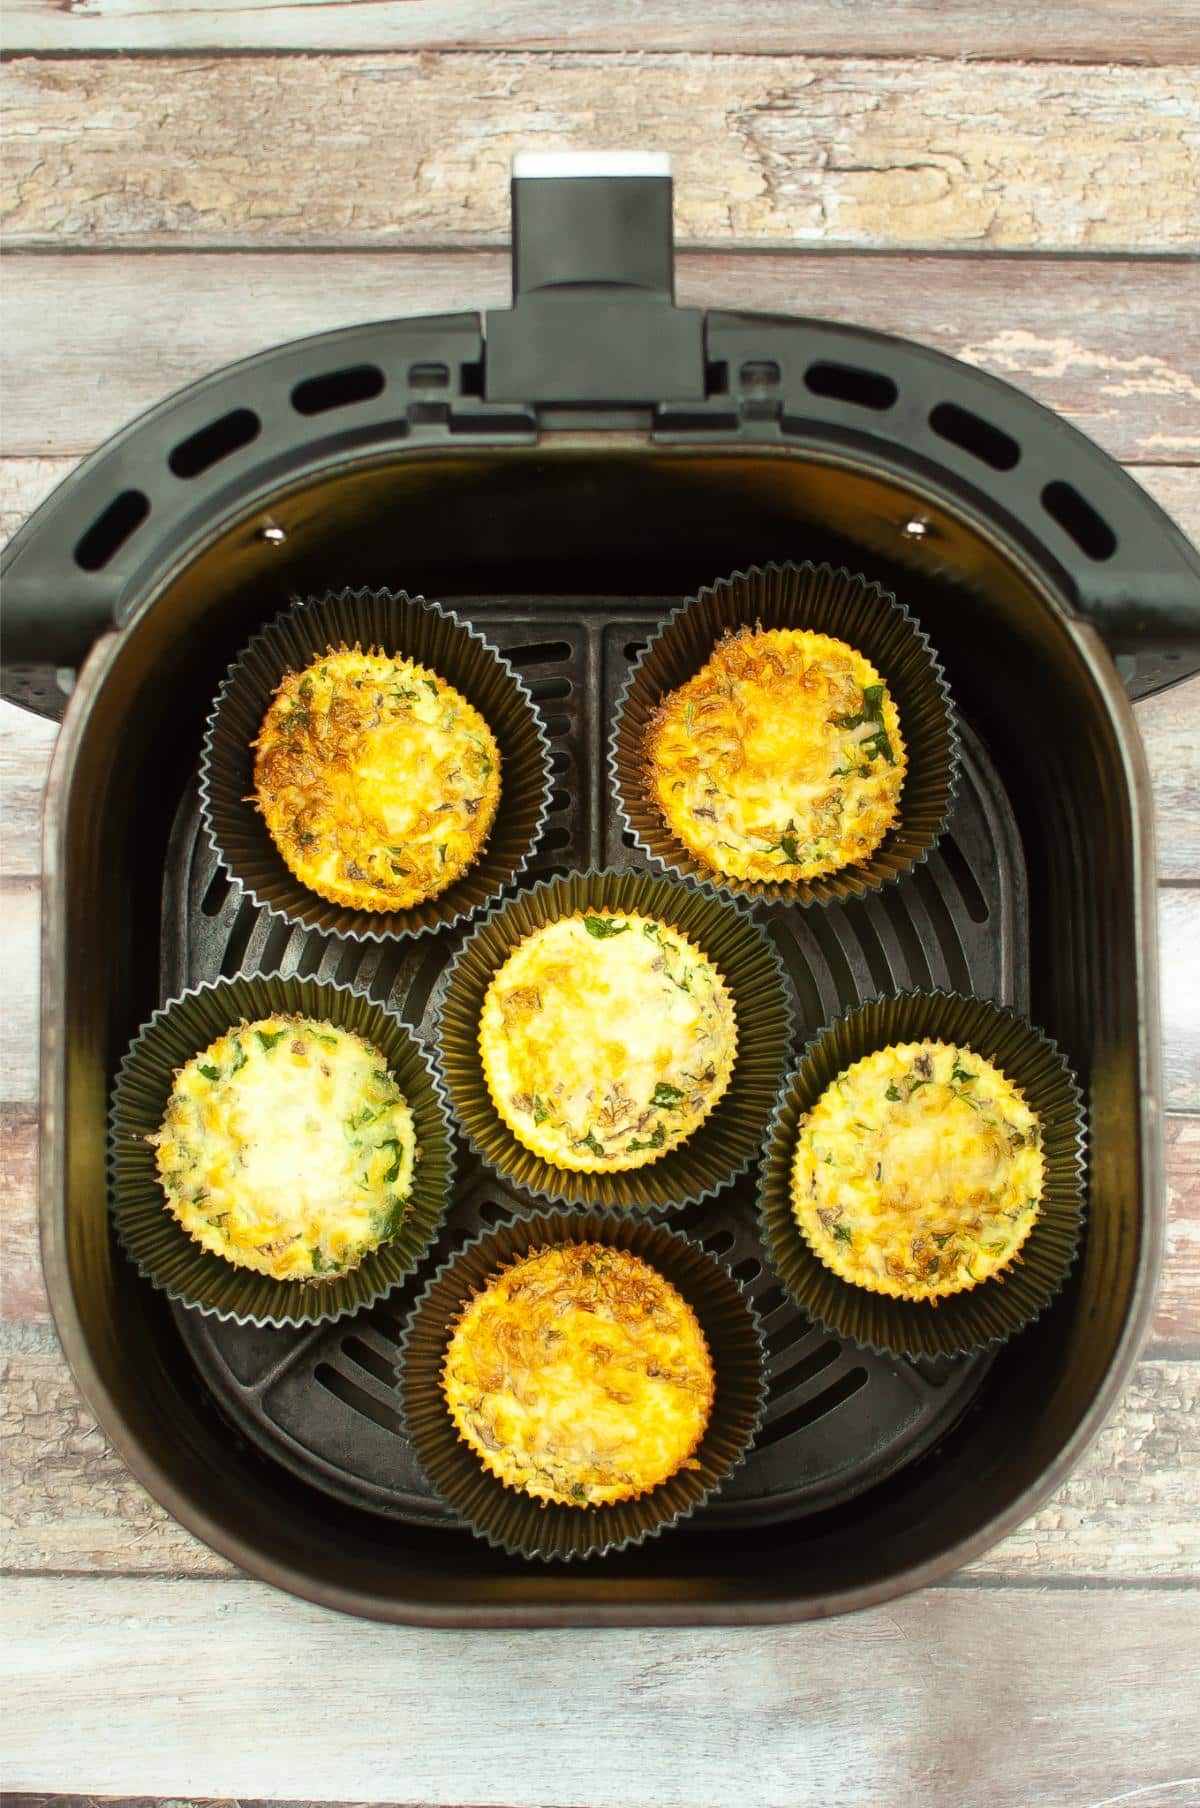 An air fryer filled with kale and mushroom egg bites.